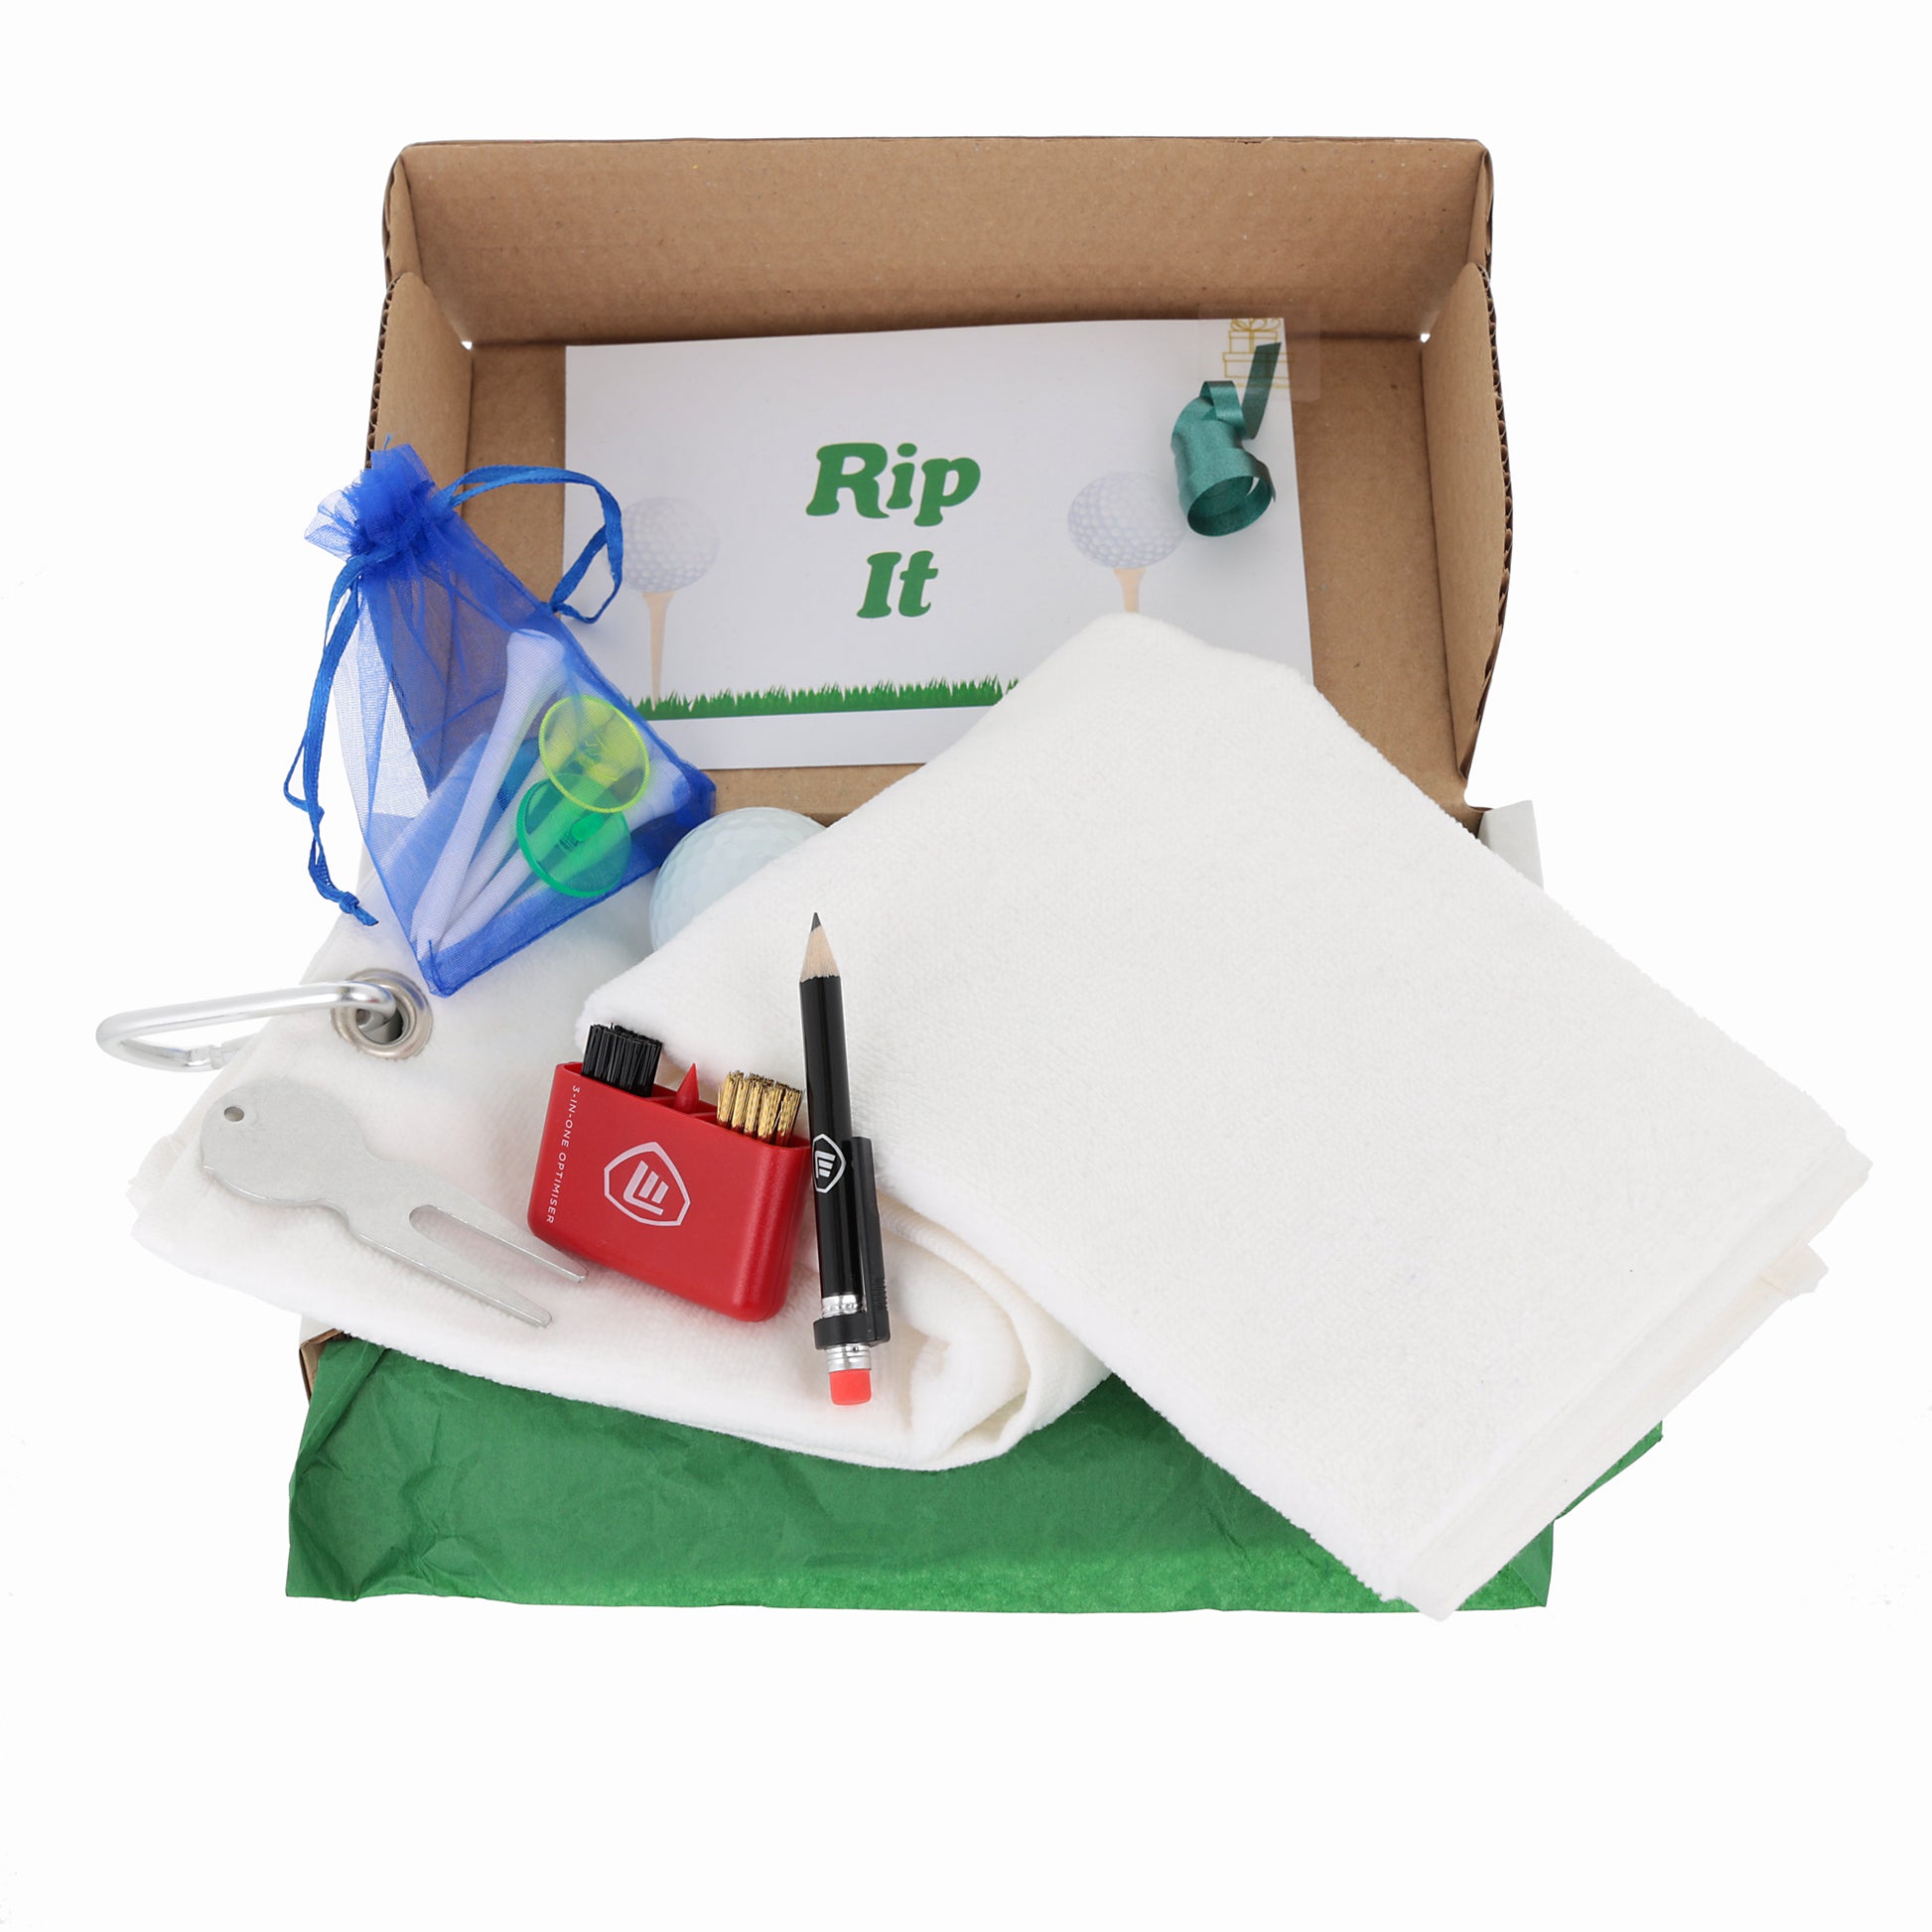 Personalised Tri Fold Golf Towel with Name Golfing Gift Box  - Always Looking Good - White Towel  